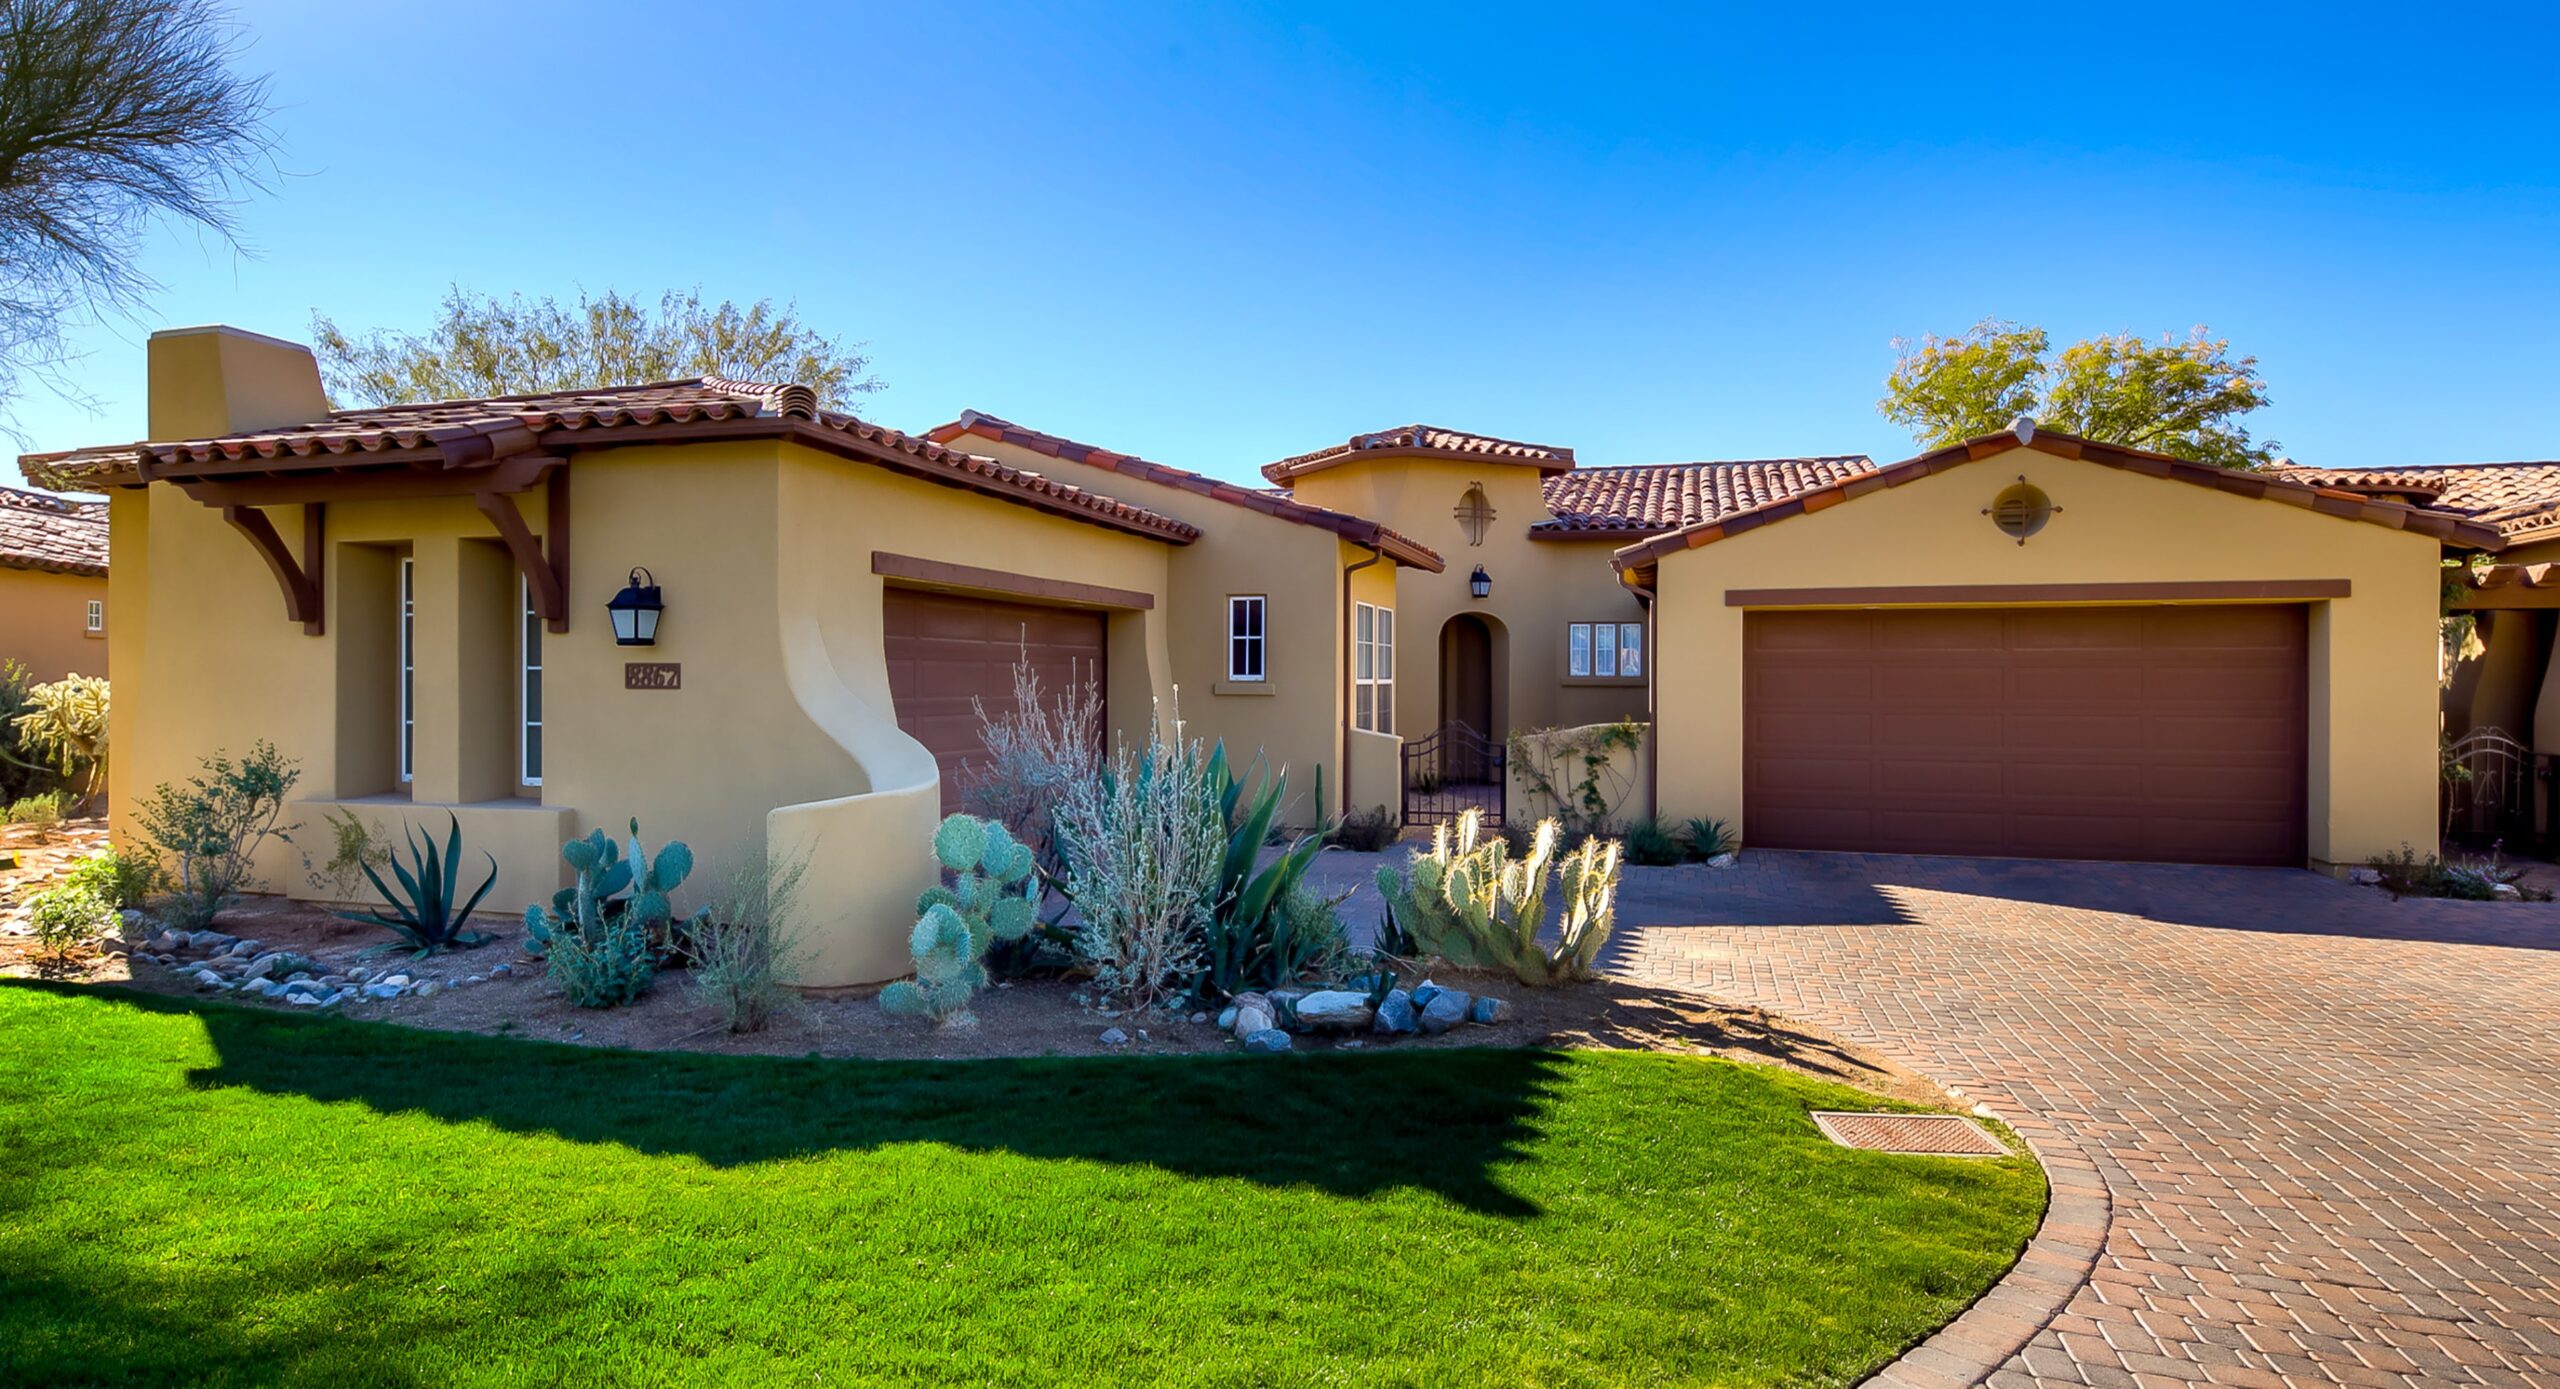 4 tips for buying a second home in an Arizona golf community